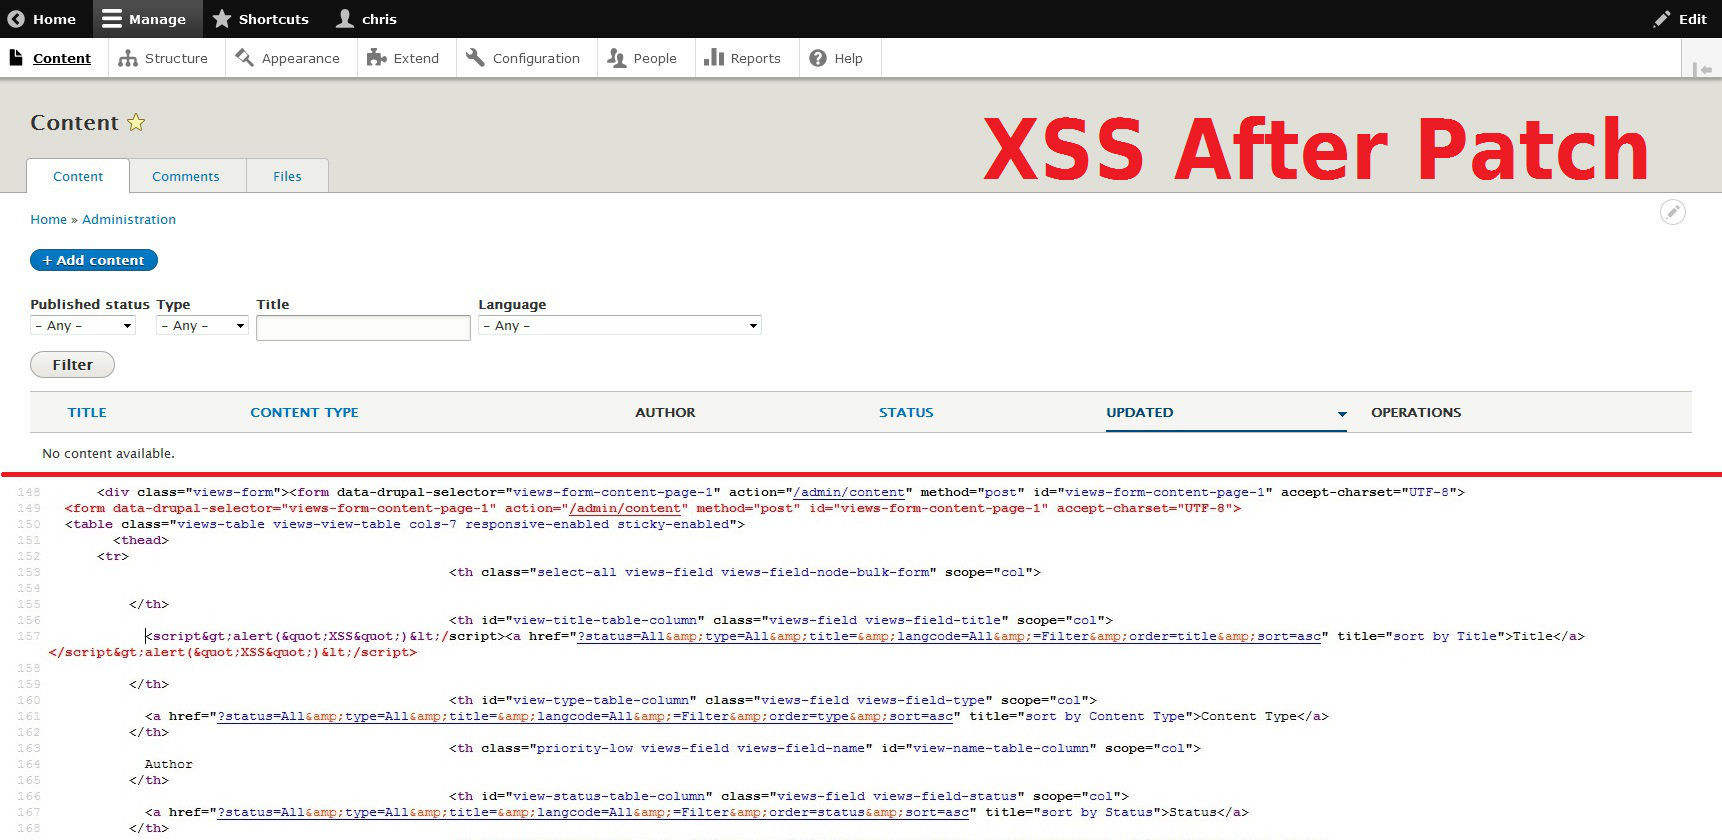 XSS After Patch